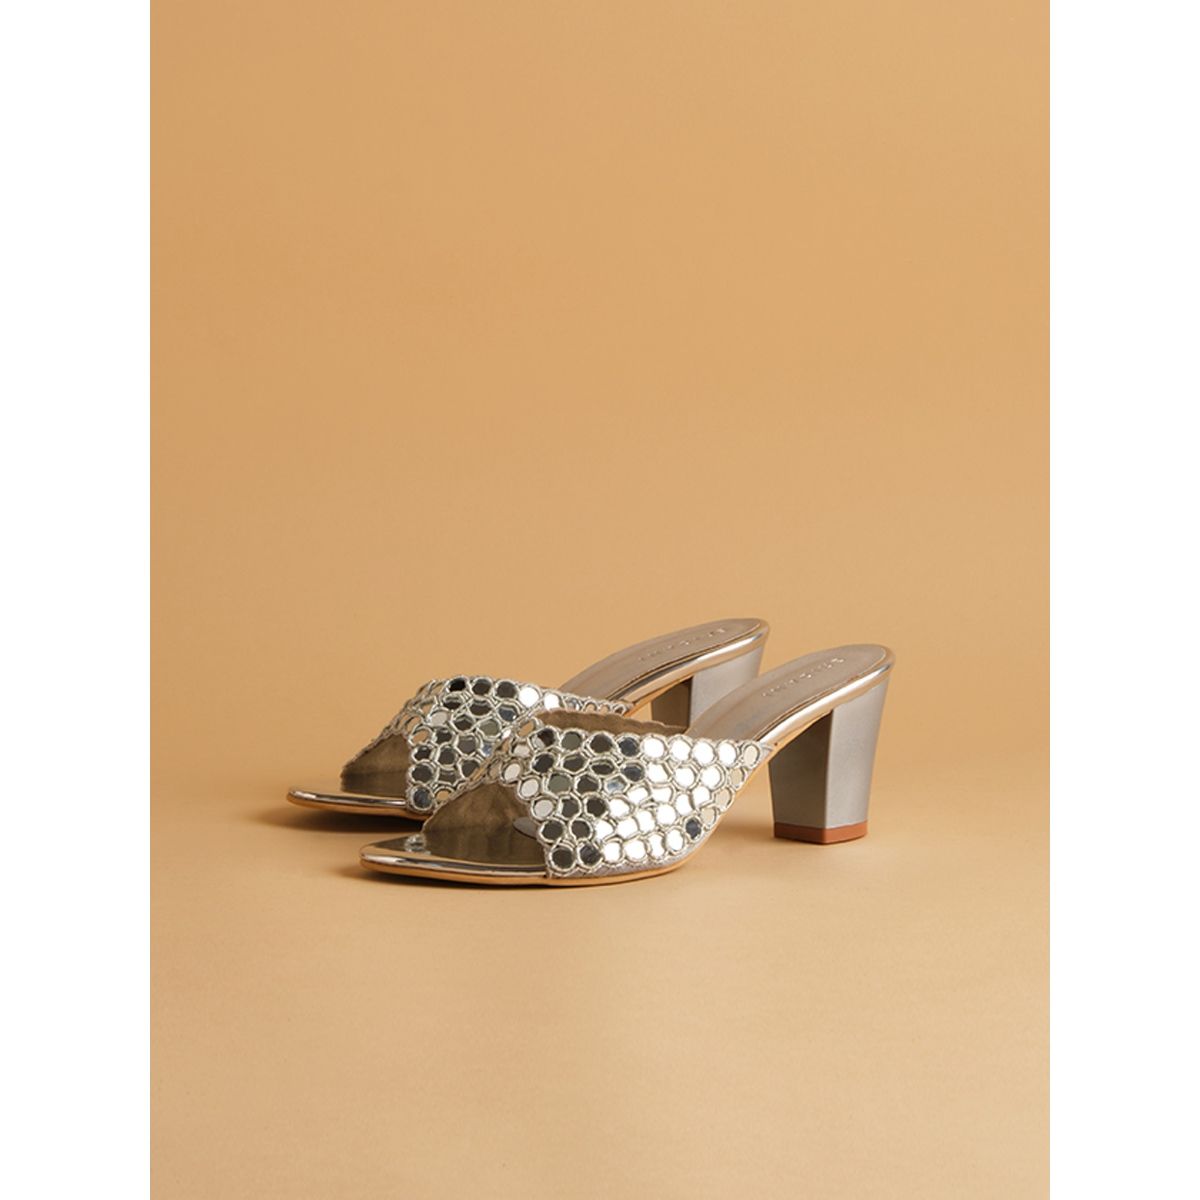 Eridani Veronic Silver Heels - Euro 37 (Silver) At Nykaa, Best Beauty Products Online